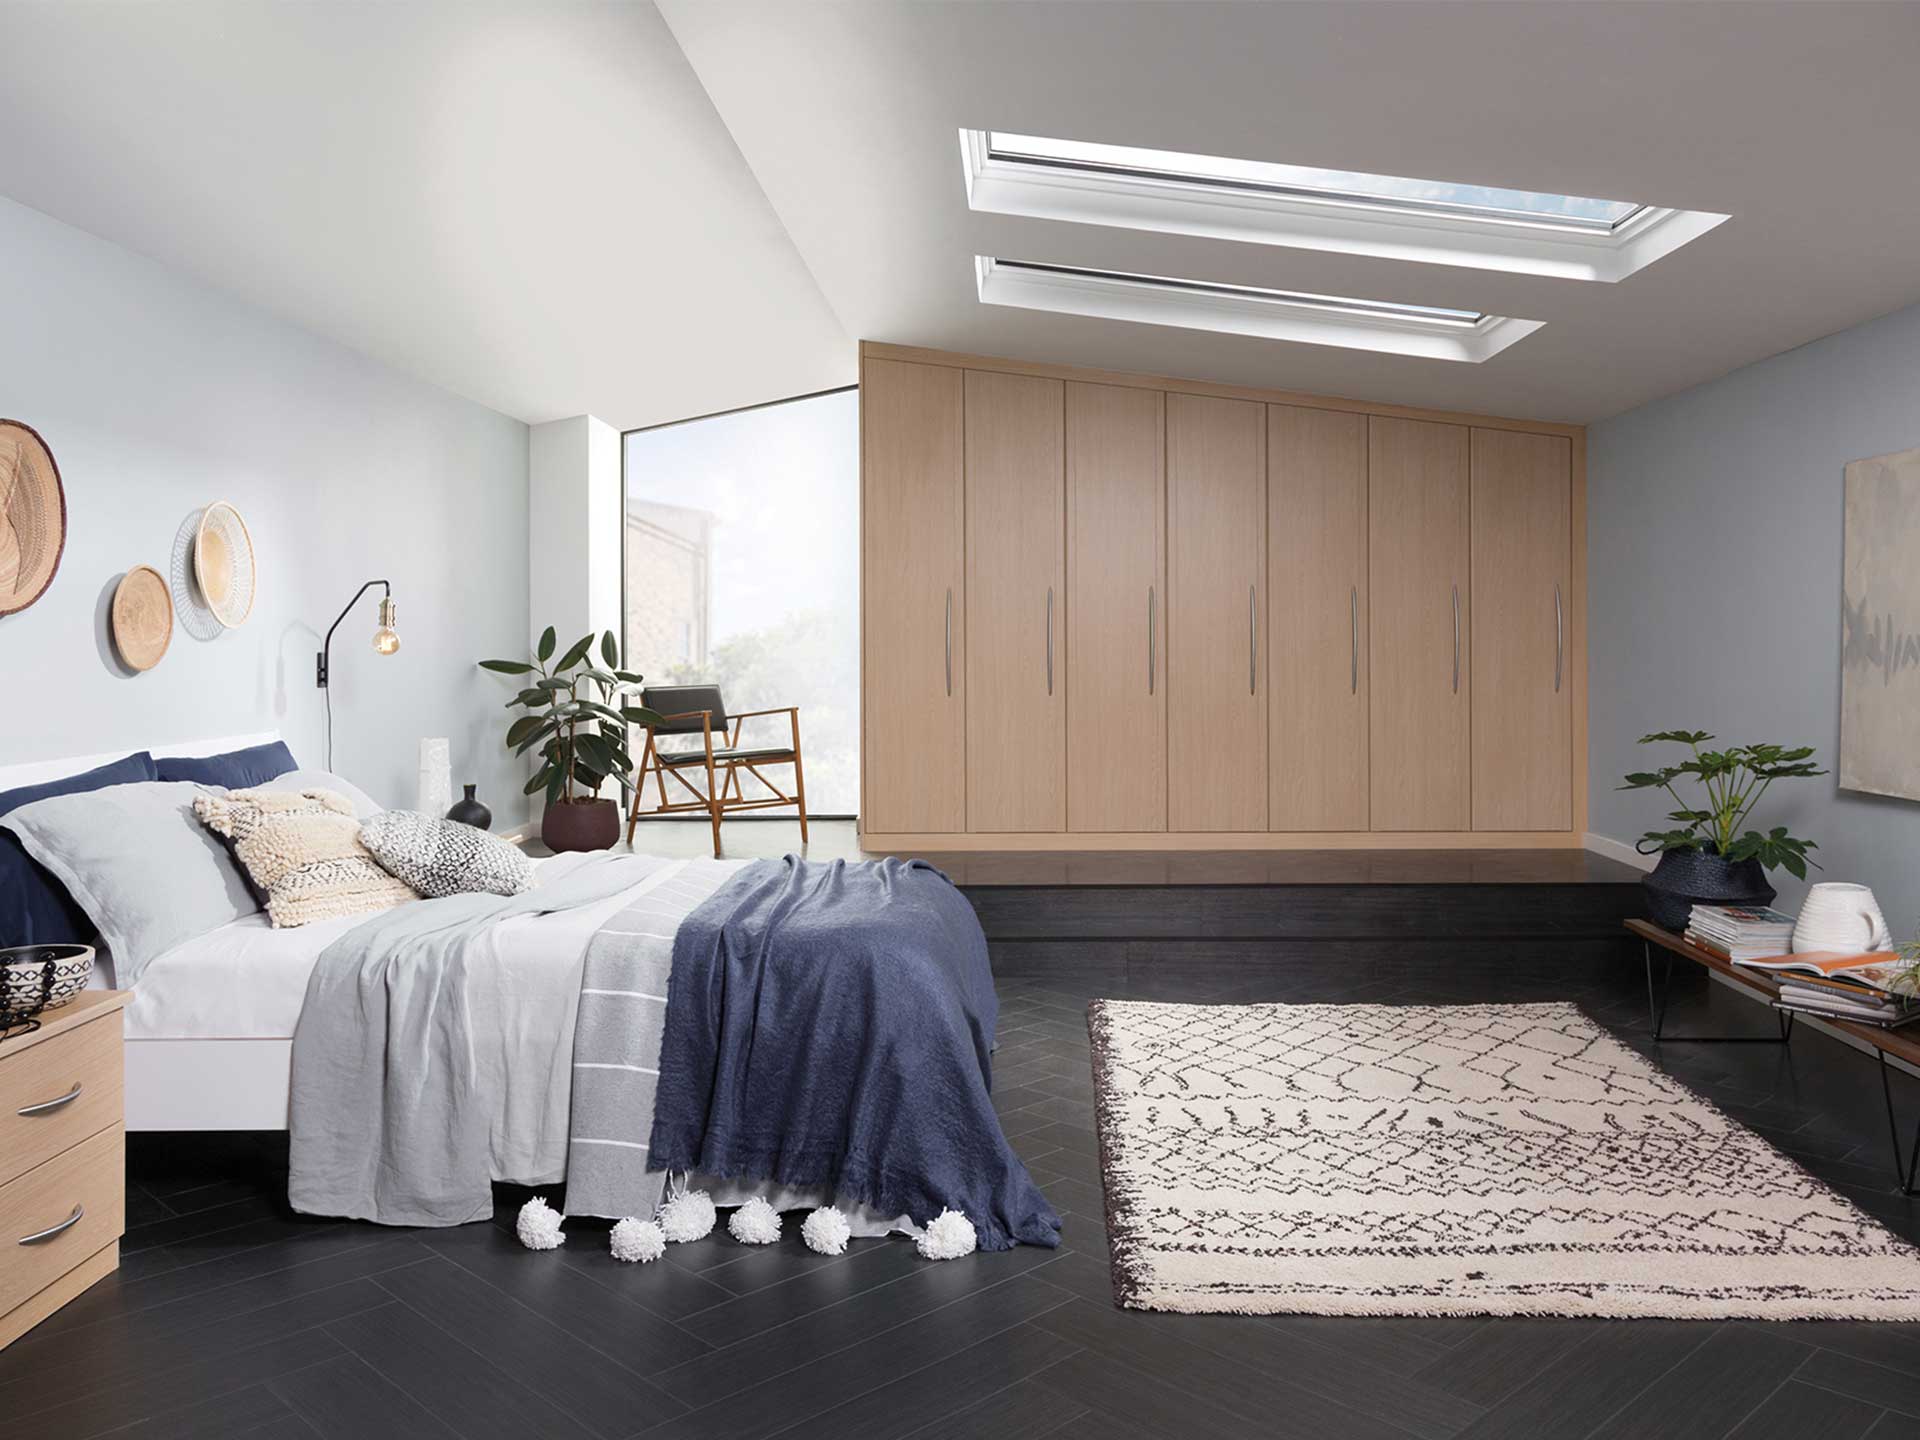 Look out to the passing clouds from your bed with the perfectly pitched skylight